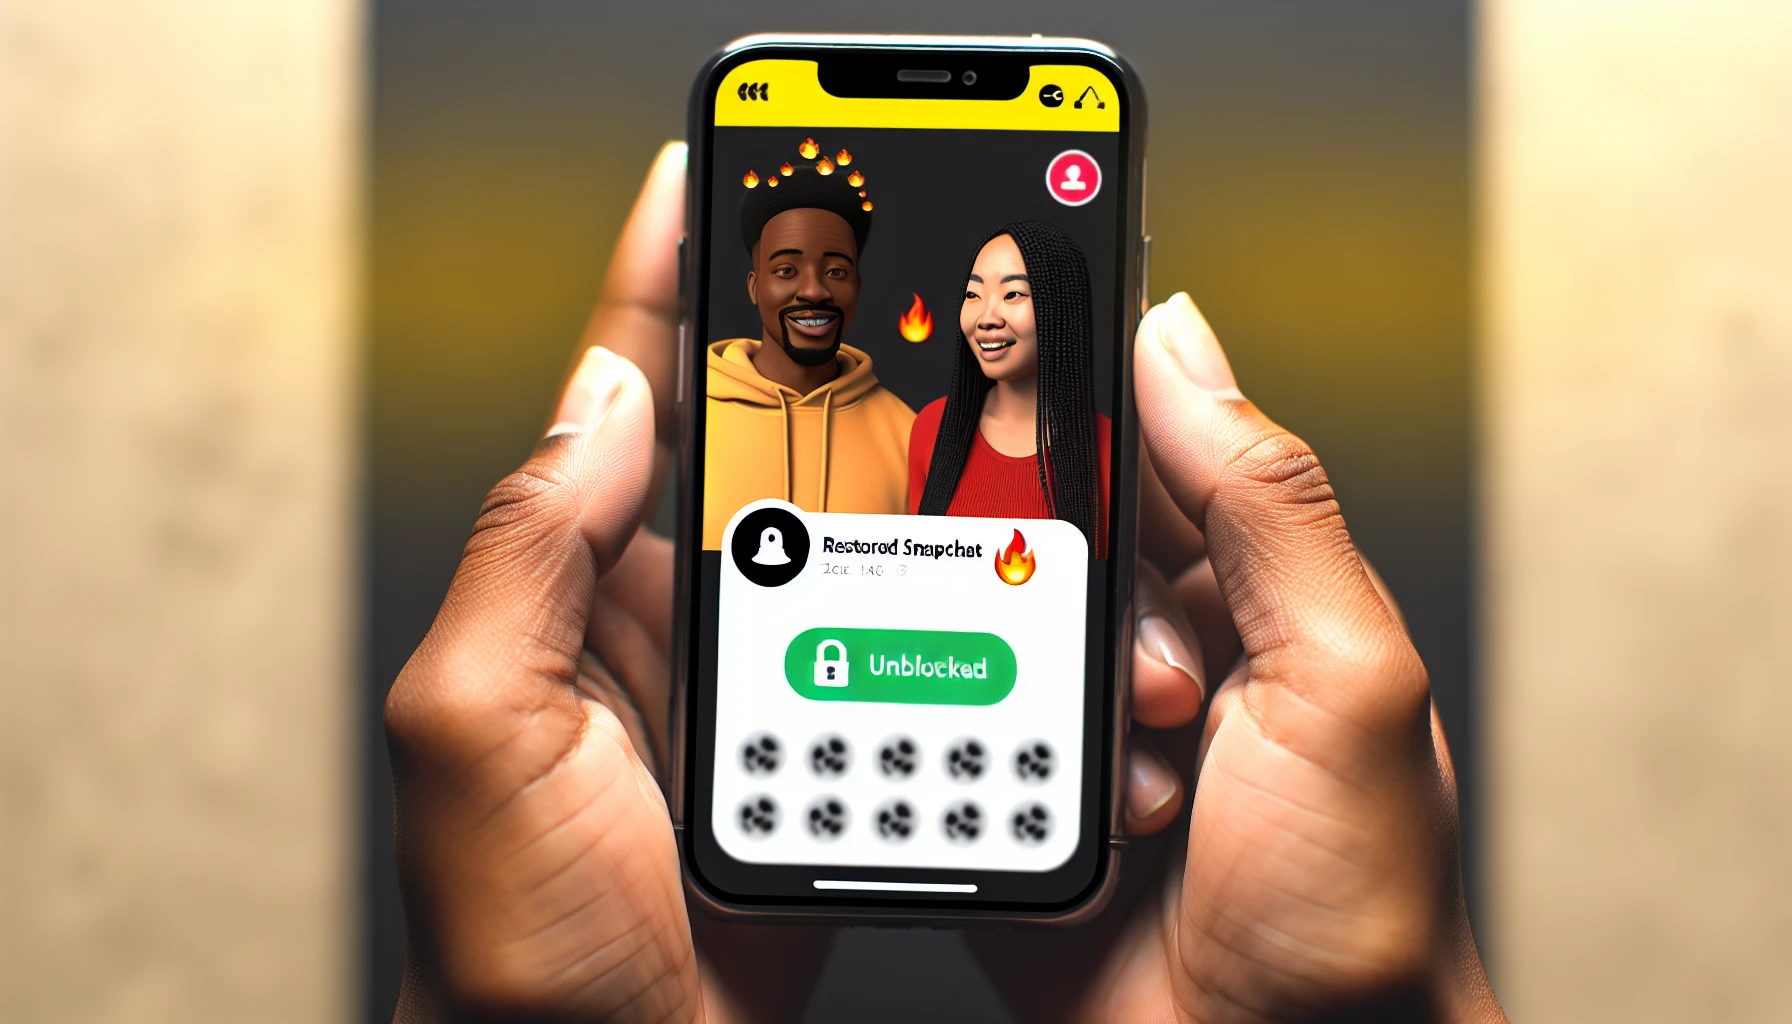 Two people reconnecting on Snapchat after unblocking